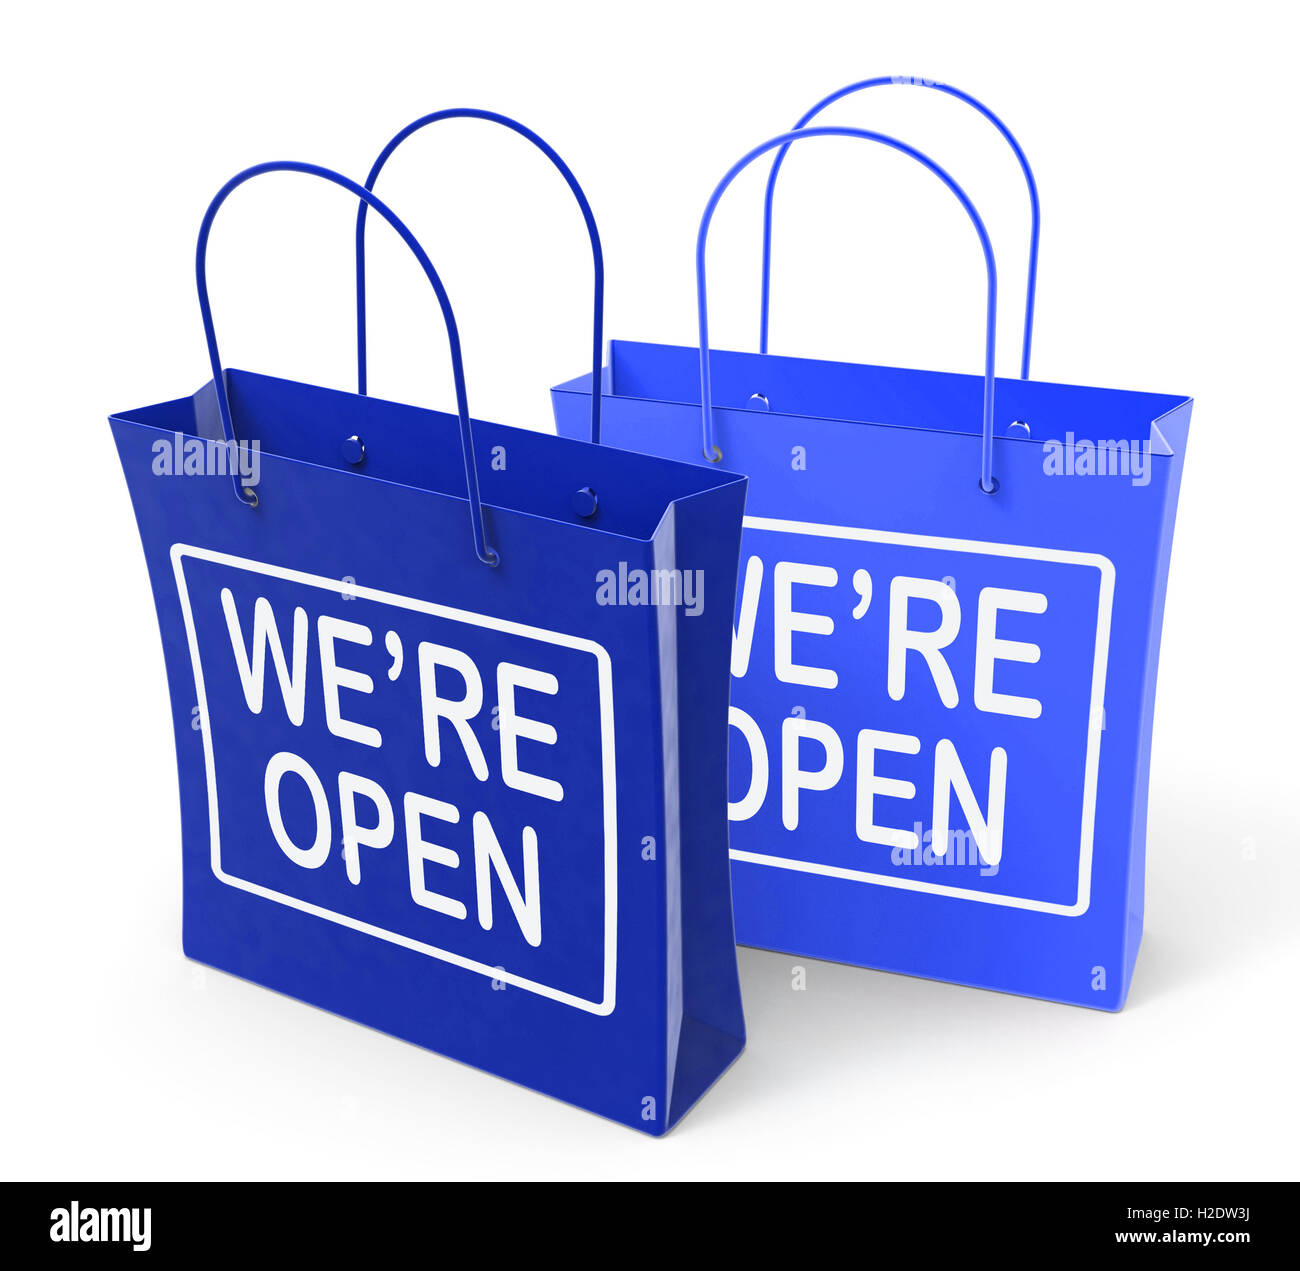 We're Open Bags Show Grand Opening or Launch Stock Photo